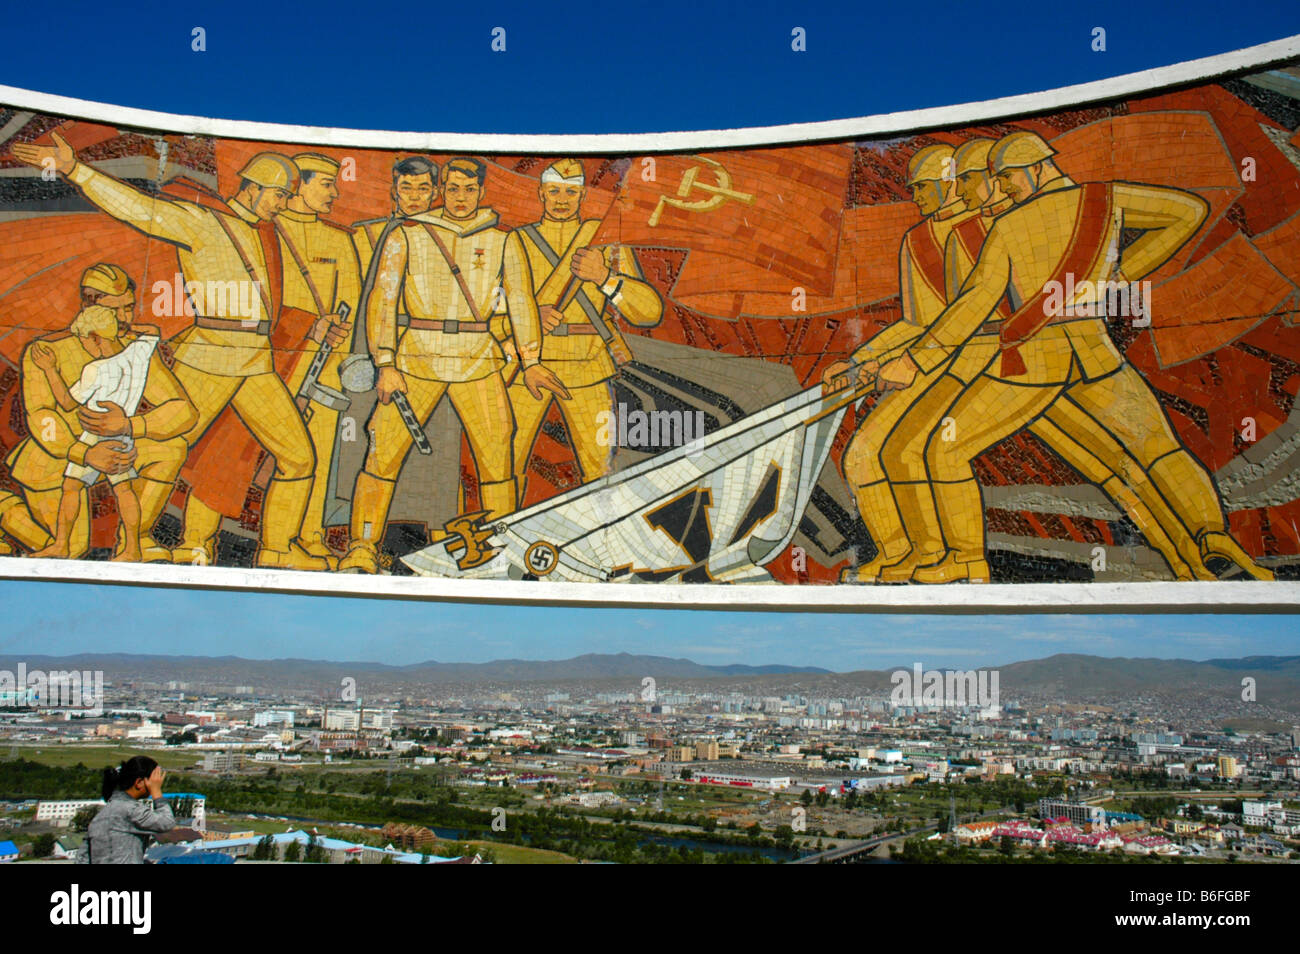 Mosaic memorial for Soviet soldiers and a view over the city of Ulan Bator, Mongolia, Asia Stock Photo